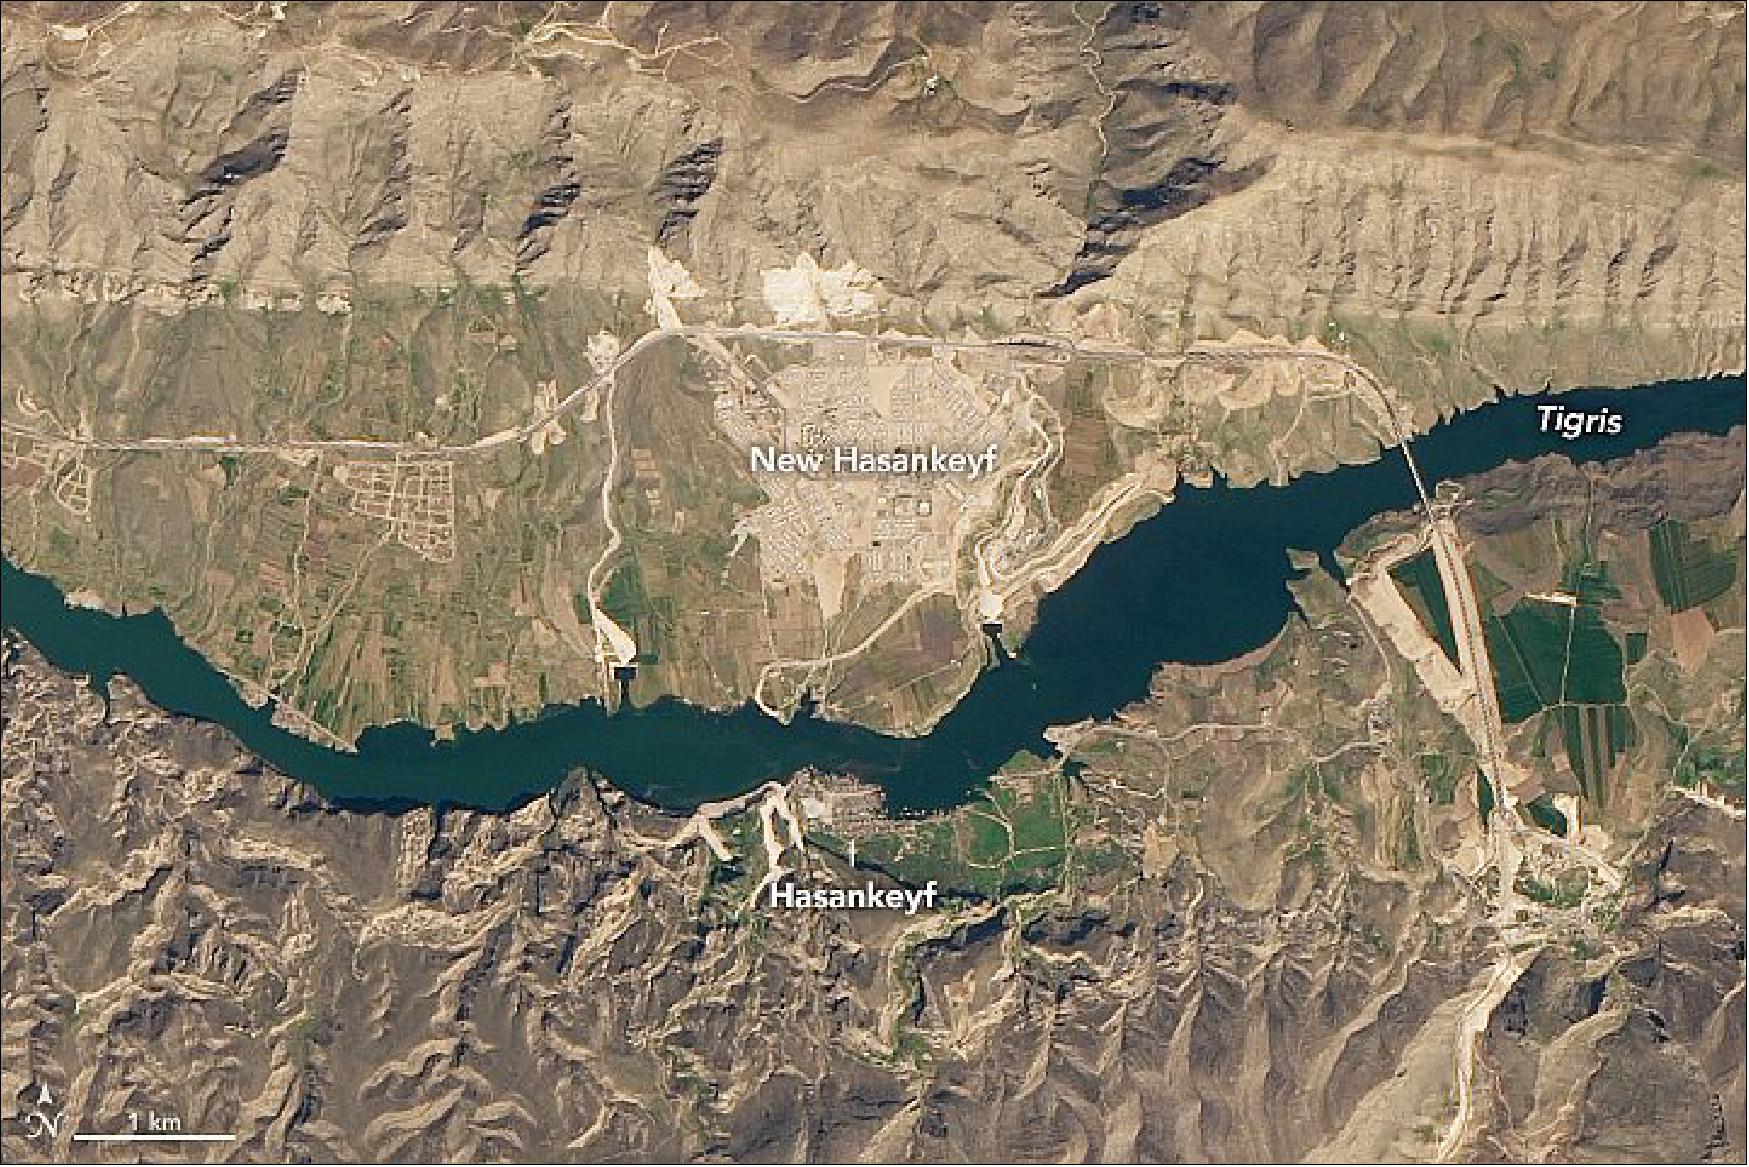 Figure 110: This natural-color image of OLI on Landsat-8 shows Hasankeyf on 12 March 2020 (image credit: NASA Earth Observatory and data from the USGS)